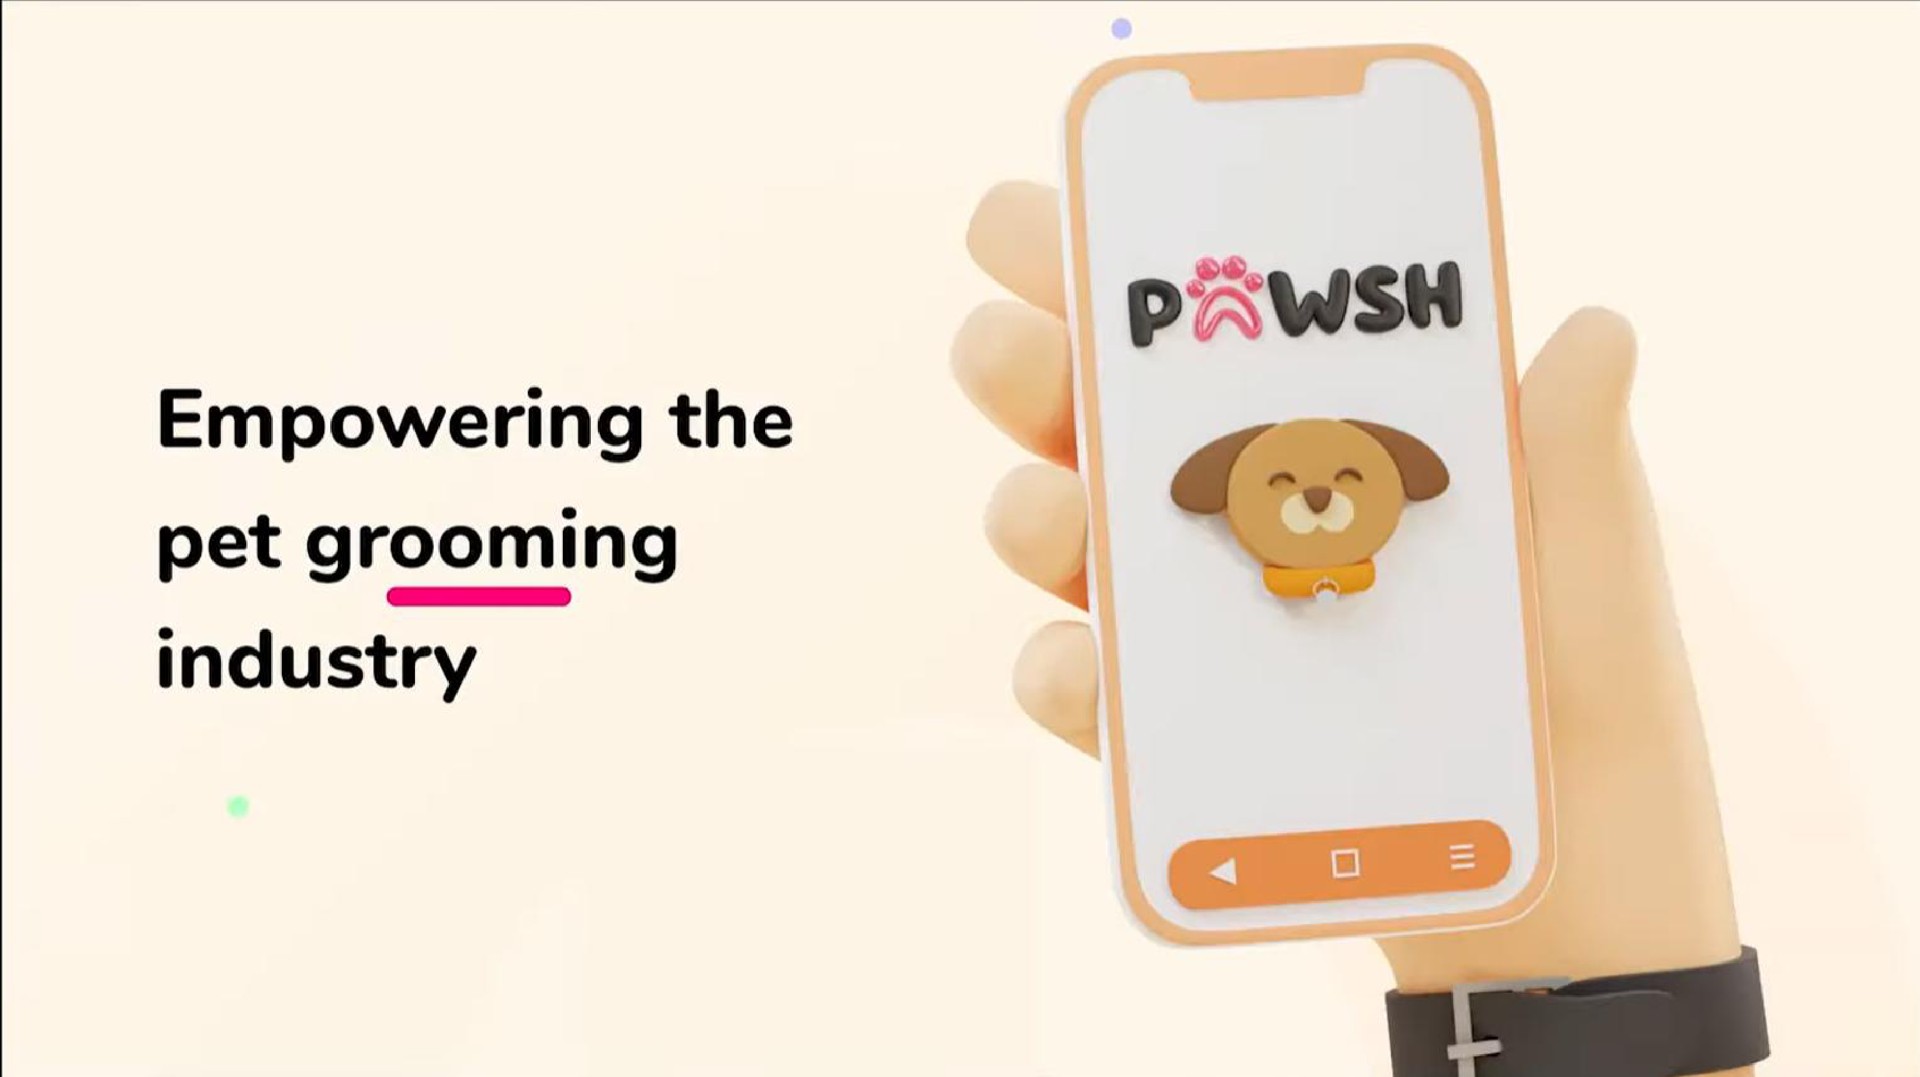 empowering the pet grooming industry i i eas | Pawsh